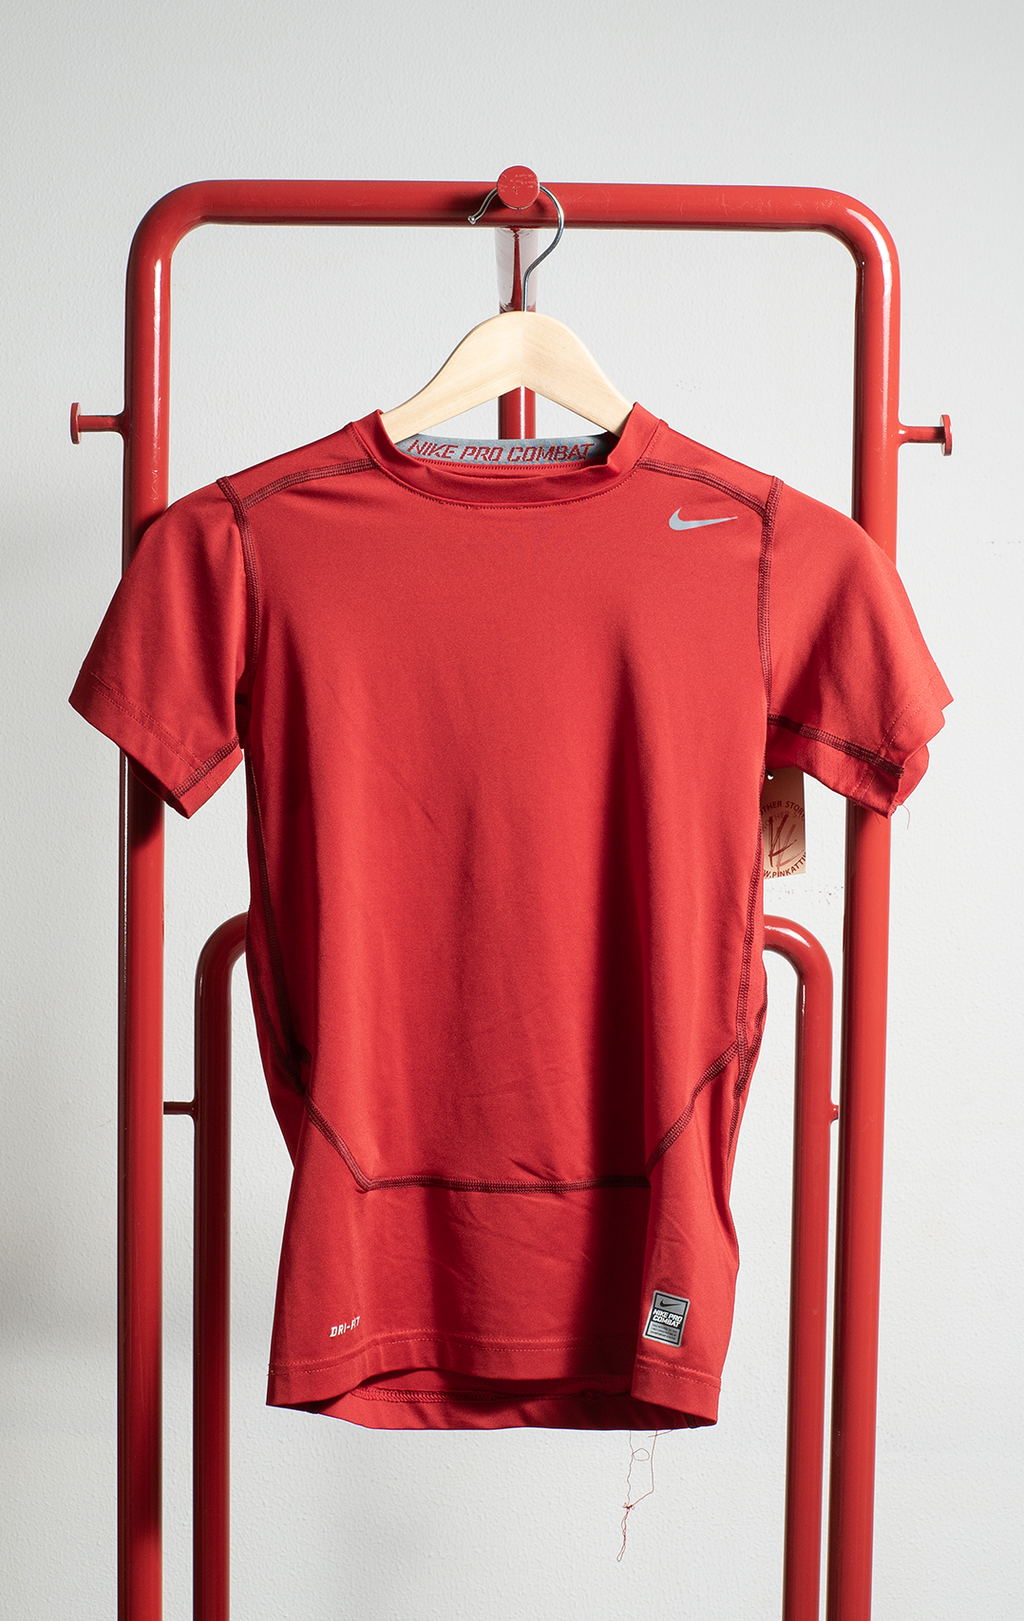 NIKE DRY-FIT TOP - Red - XLarge